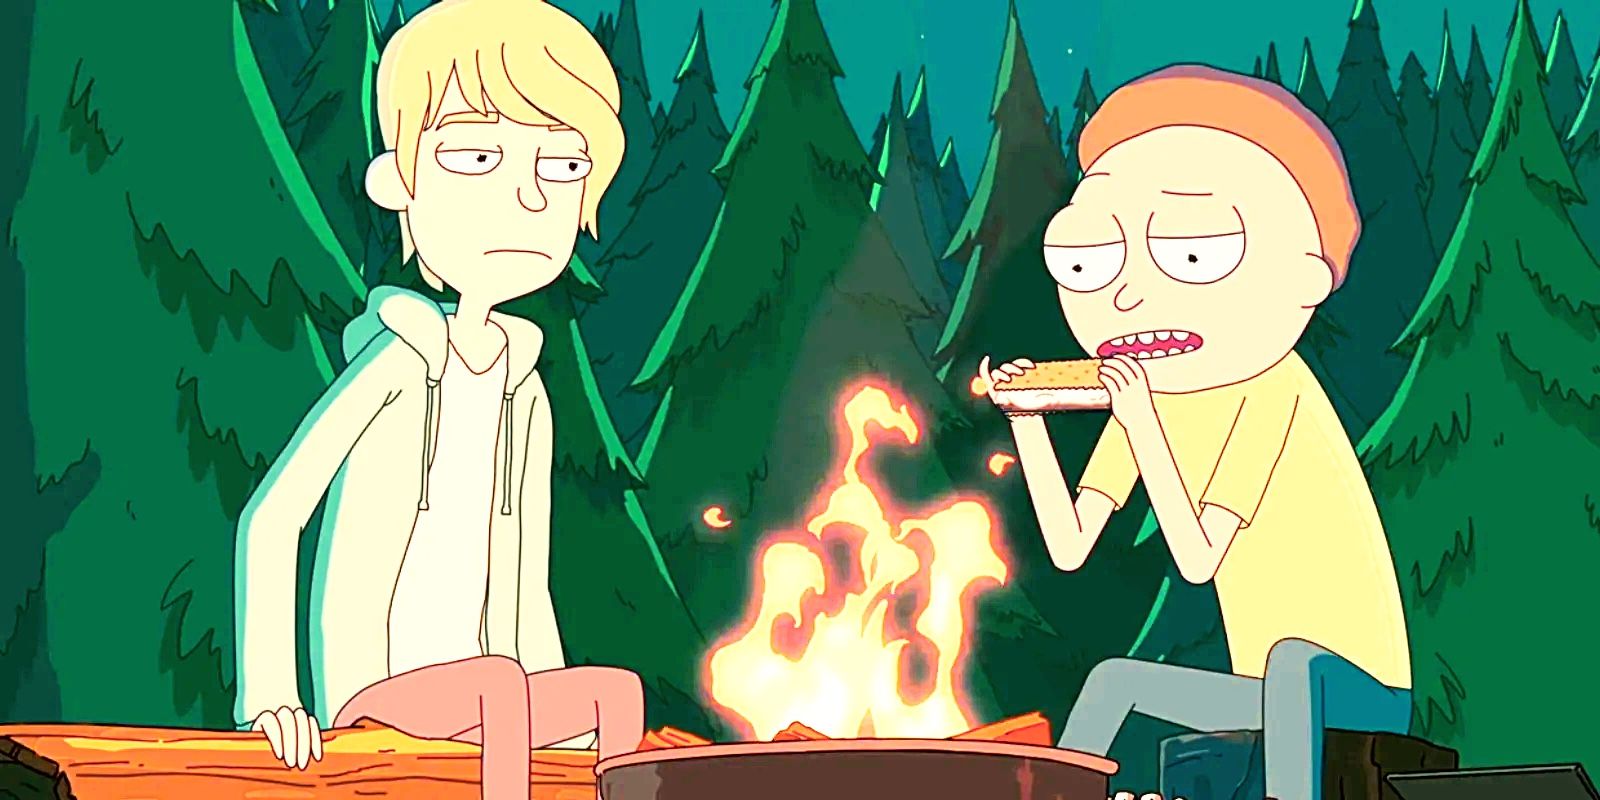 morty and ethan eating s'mores in rick and morty season 3